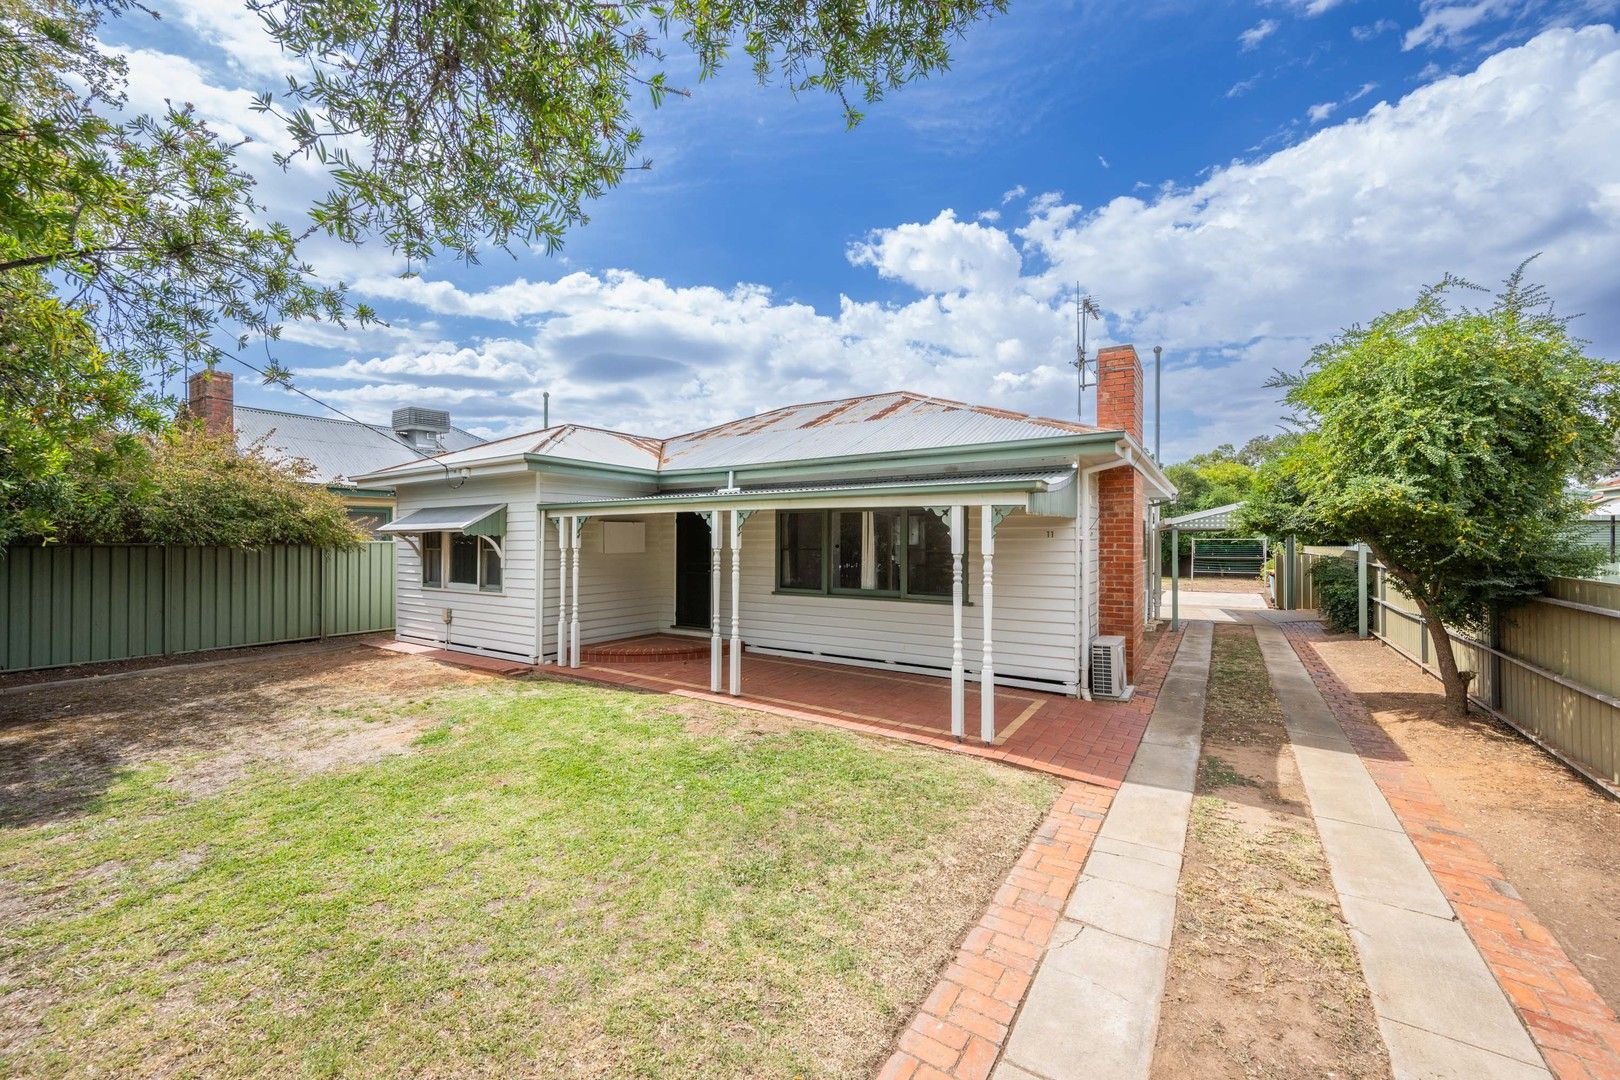 3 bedrooms House in 11 Esson Street SHEPPARTON VIC, 3630